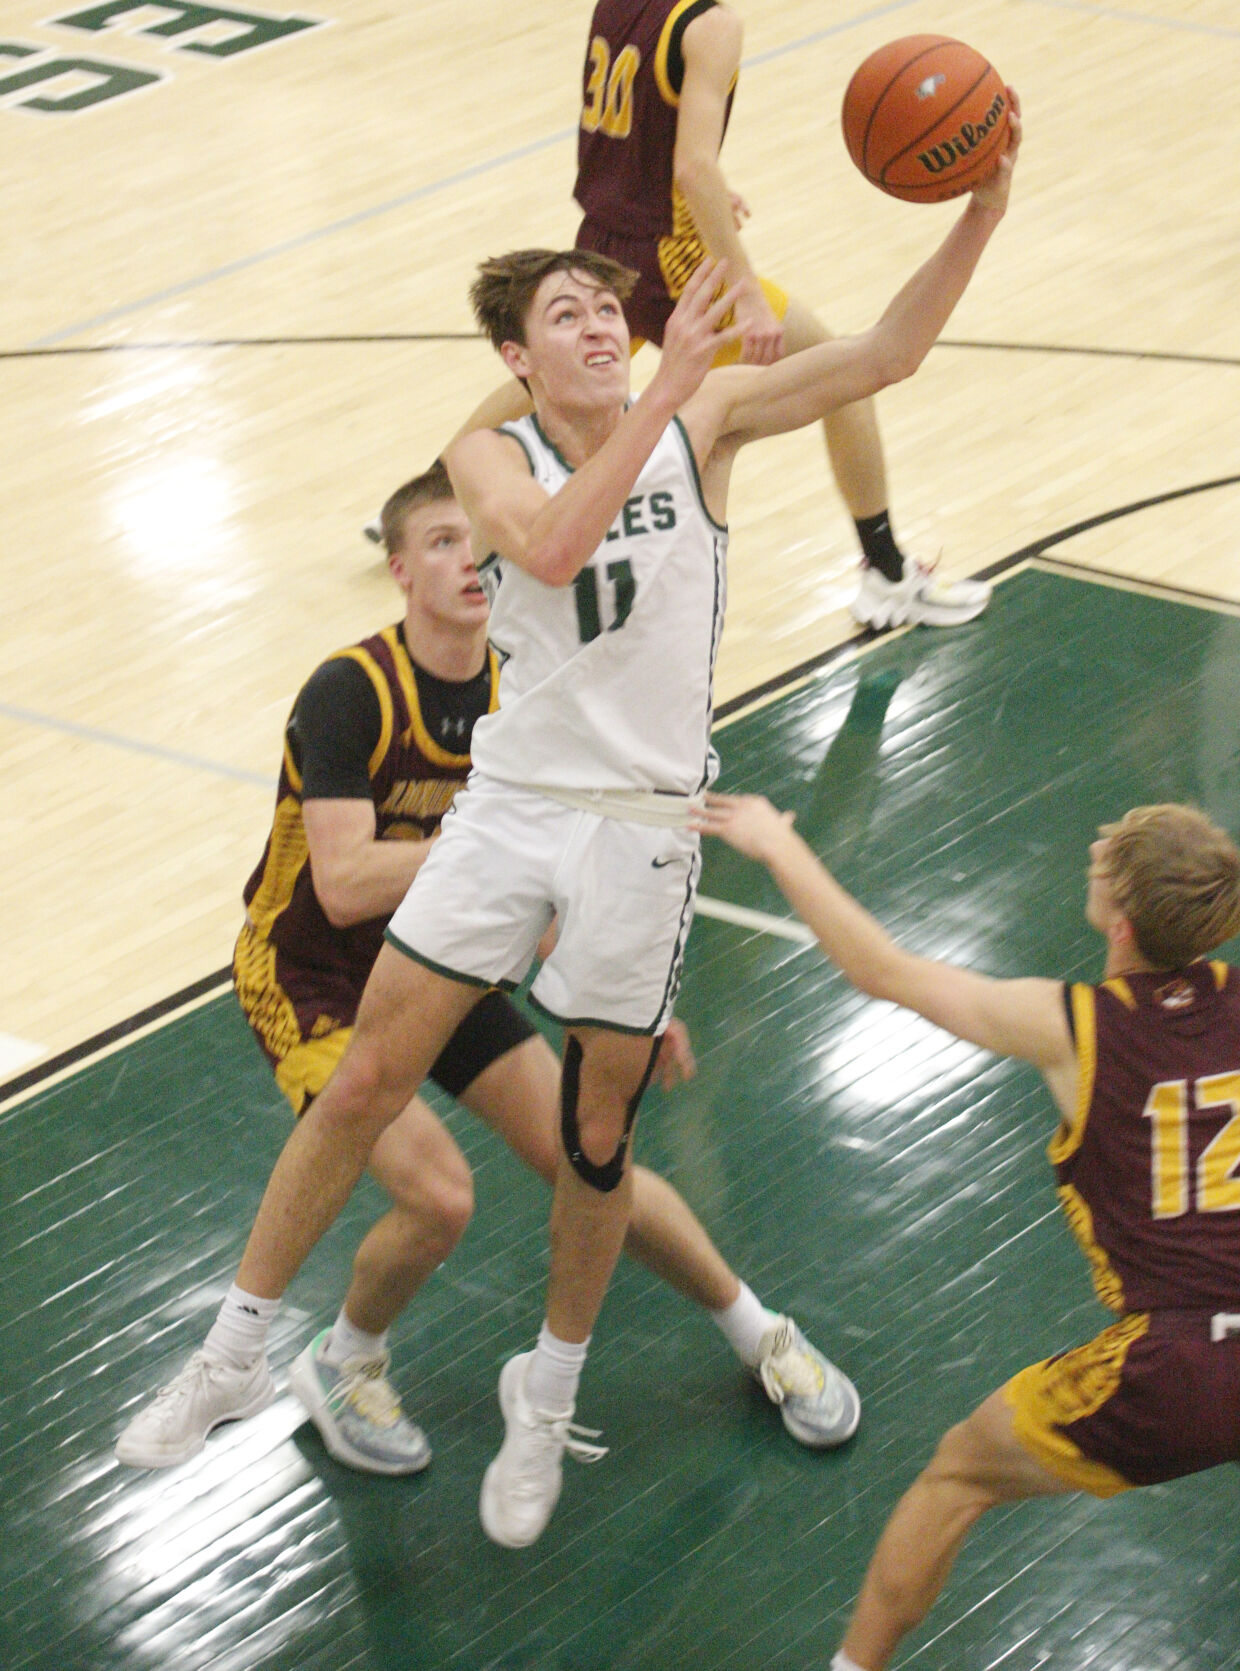 Noblesville Secures Victory Over Zionsville in Thrilling Basketball Showdown